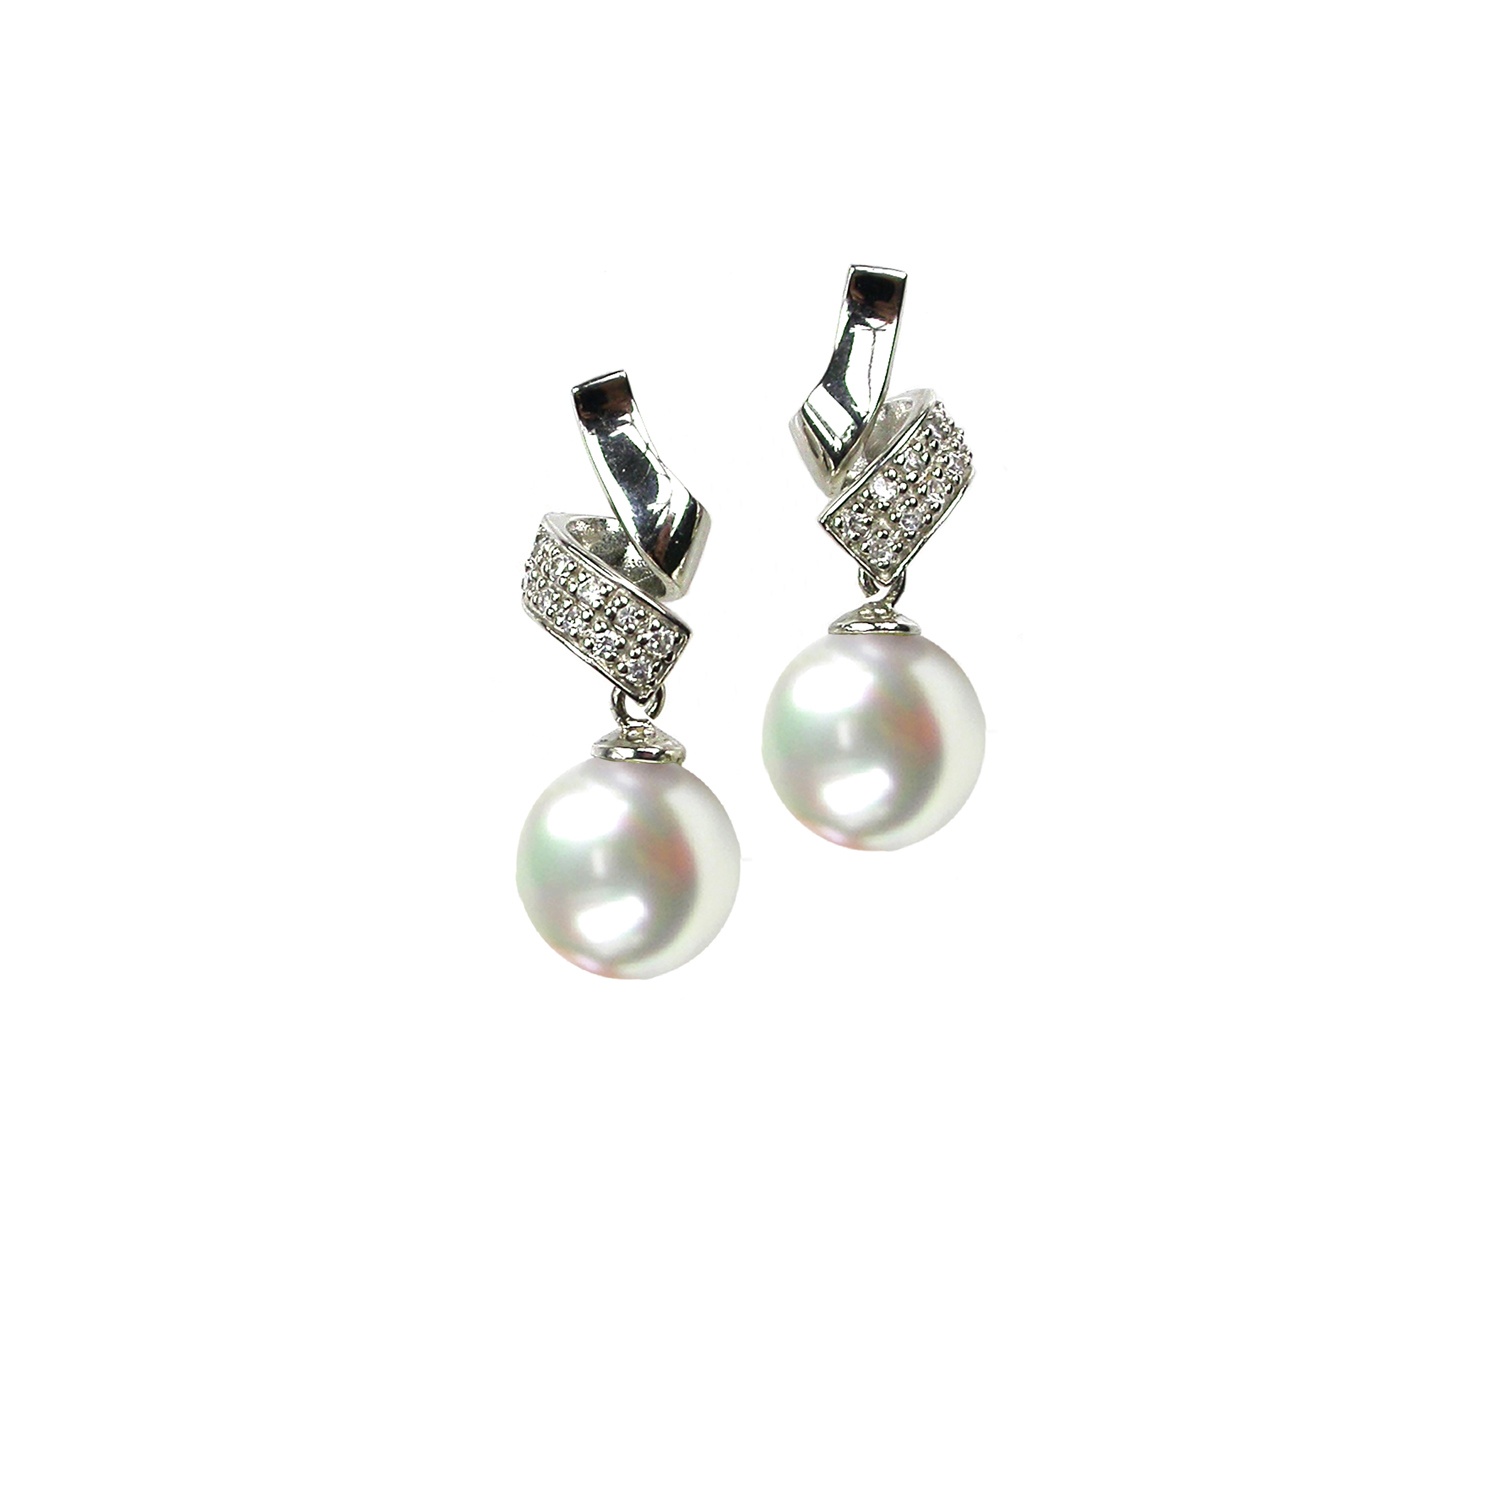 Sterling Silver Earrings with White Pearls and Zircons.